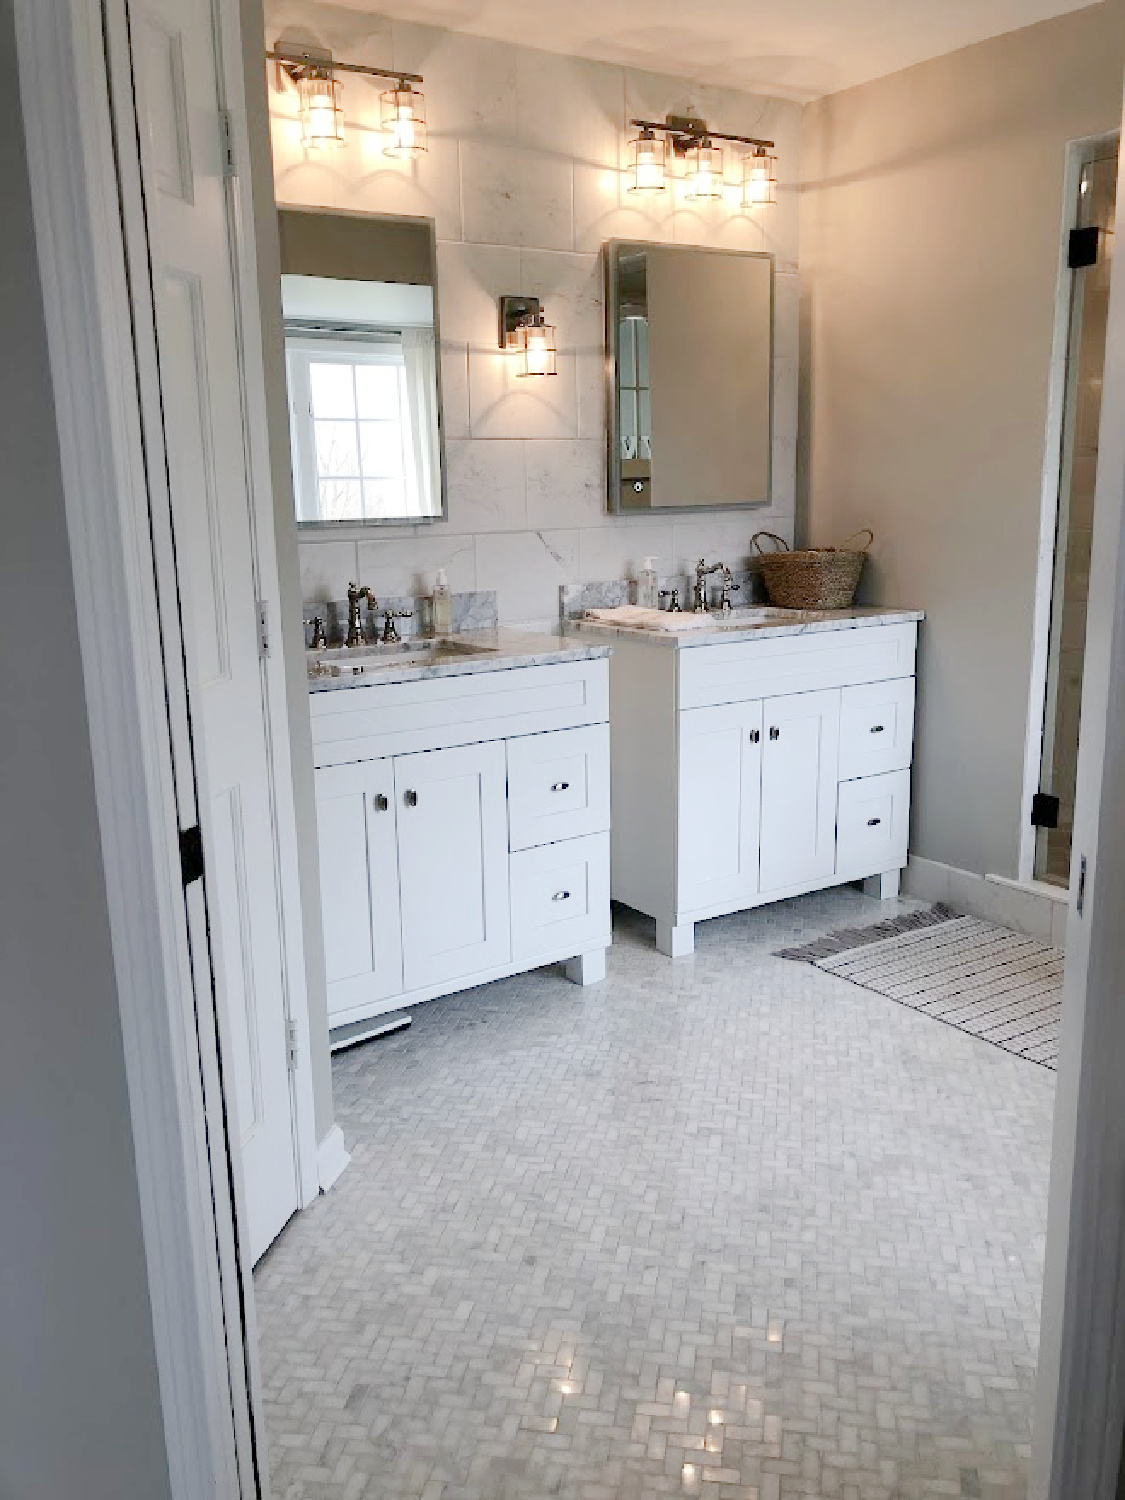 SW Repose Gray on walls, Shaker style white vanities, modern LED medicine cabinets, and white marble mosaic herringbone tiled floor in our modern French renovated bath at the Georgian - Hello Lovely Studio.